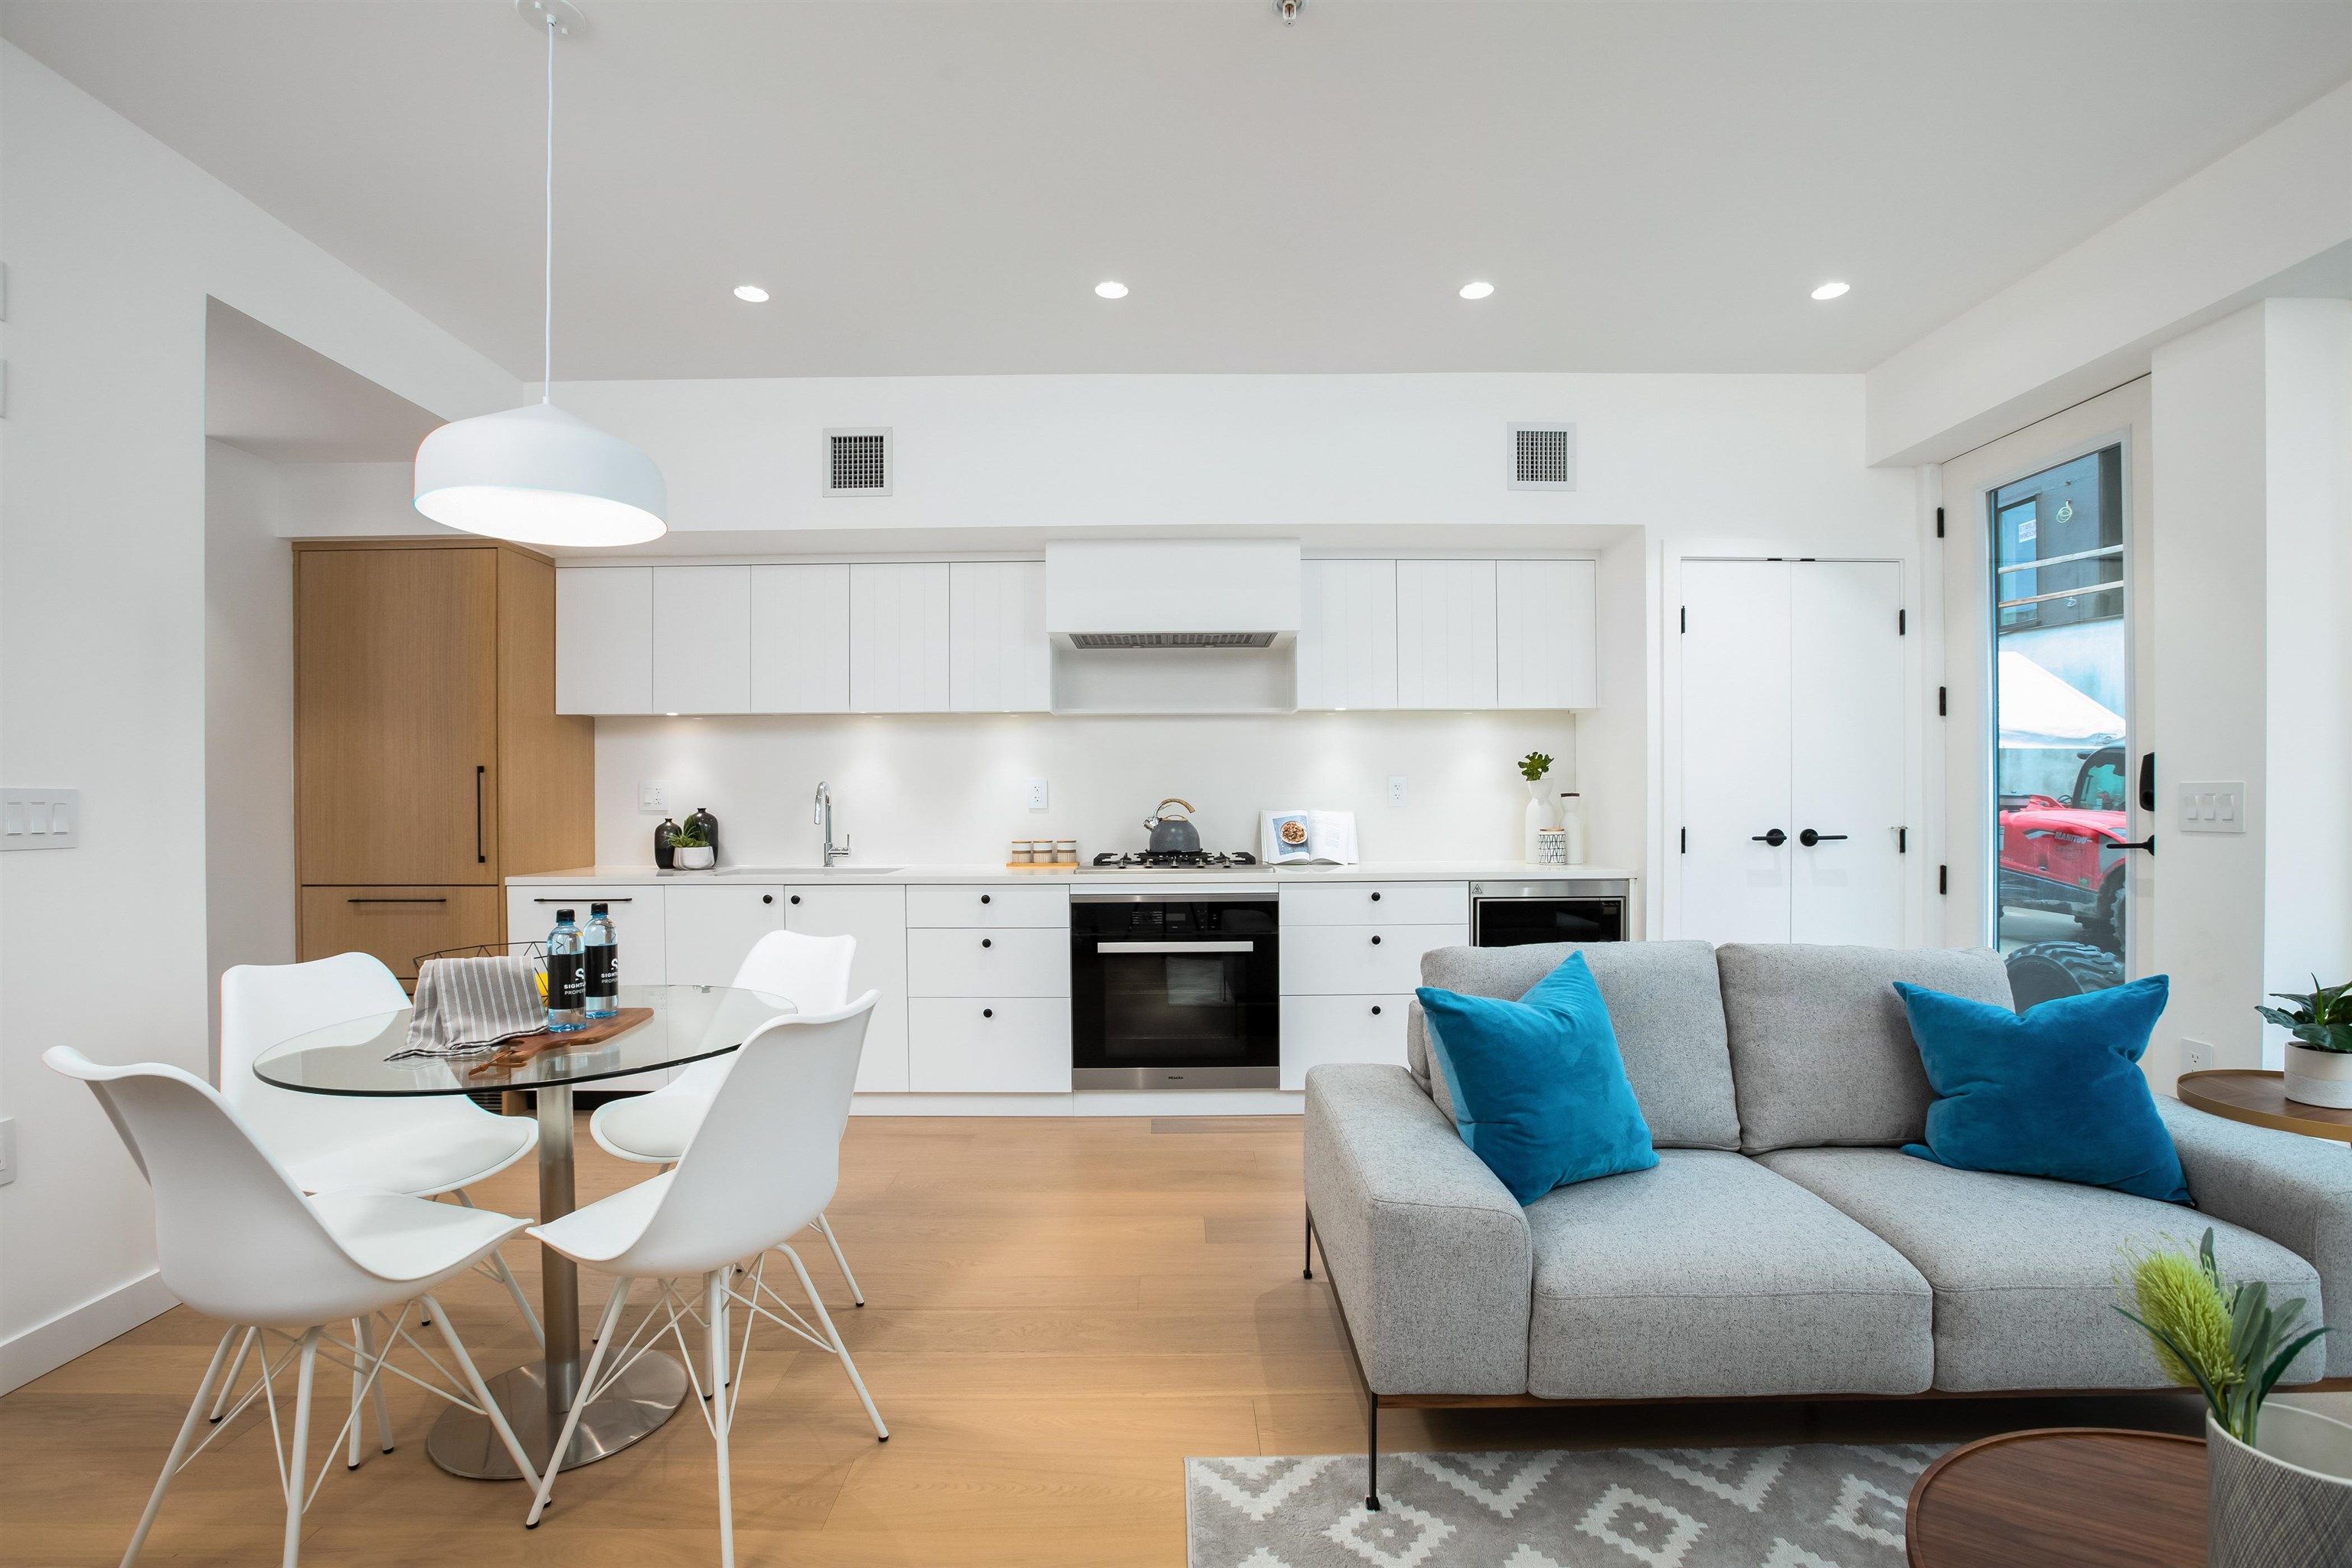 â¢ An intimate community of 51 townhomes and  garden suites intelligently designed by Shape  Architecture to maximize outdoor living and  community connections